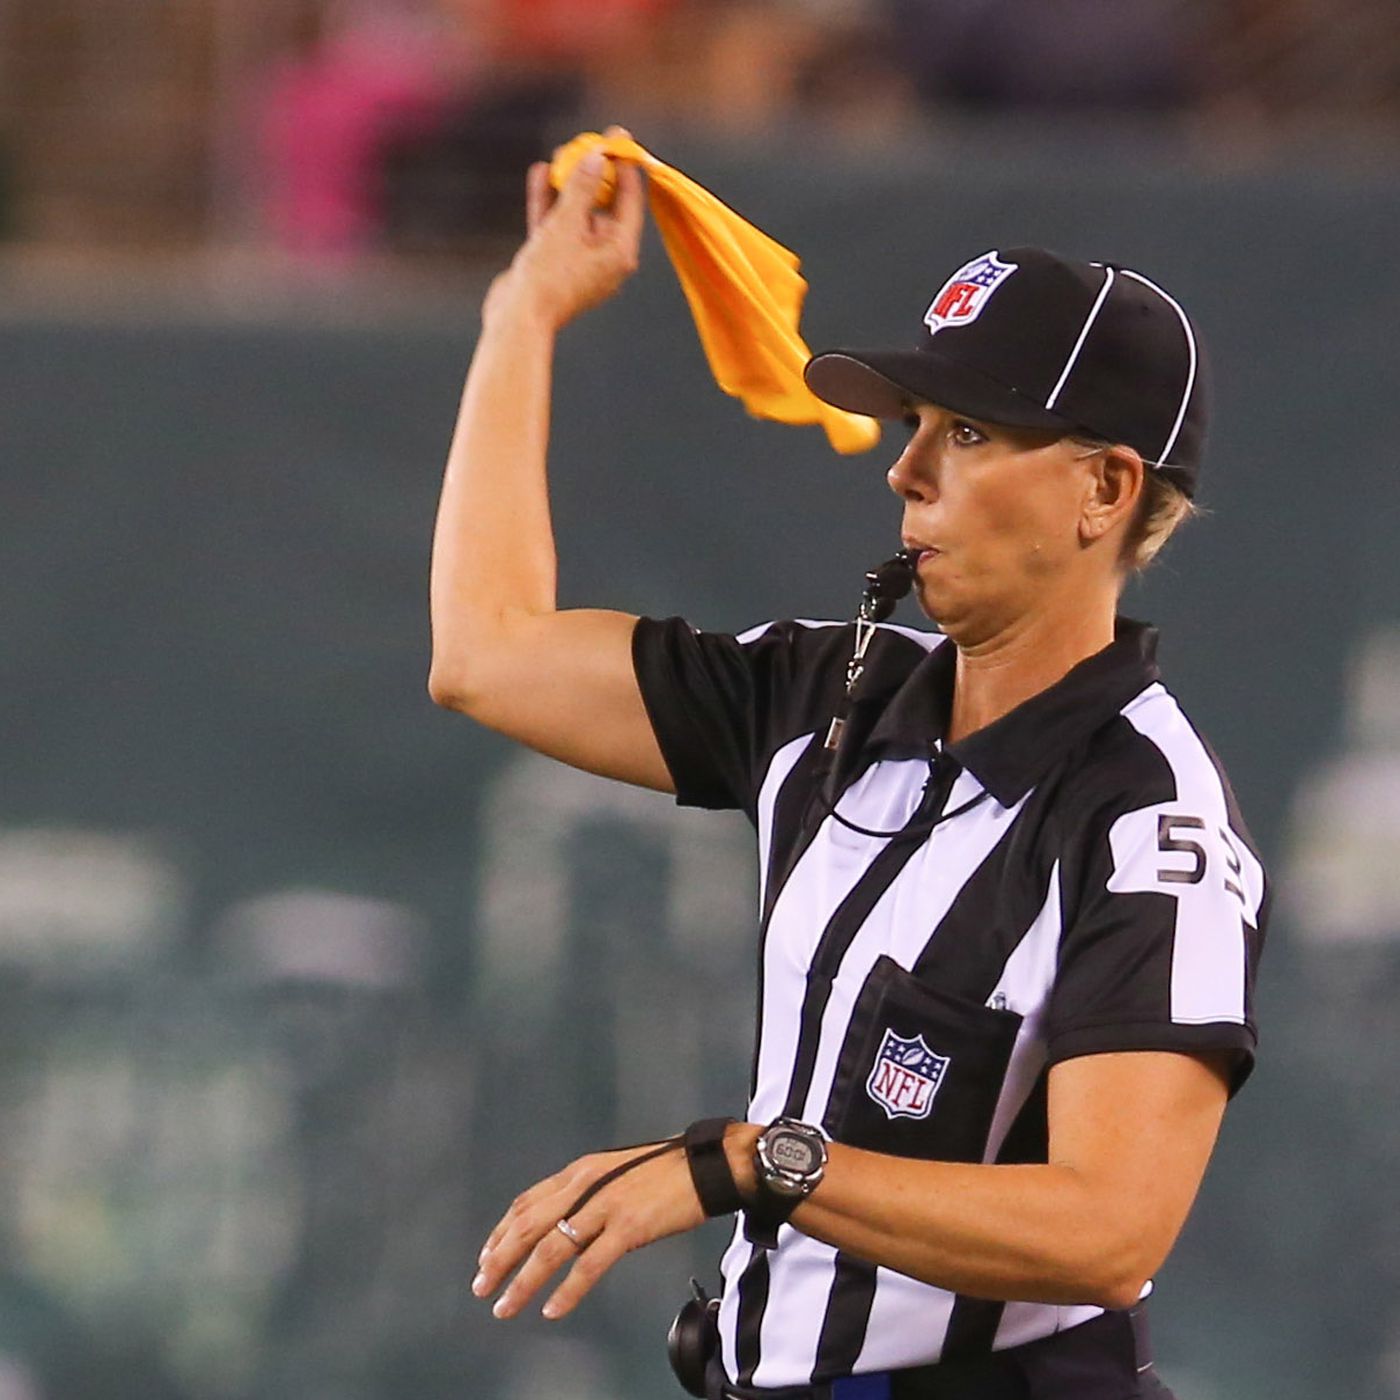 Game 6, Penalty Review: This is not supposed to be Flag Football